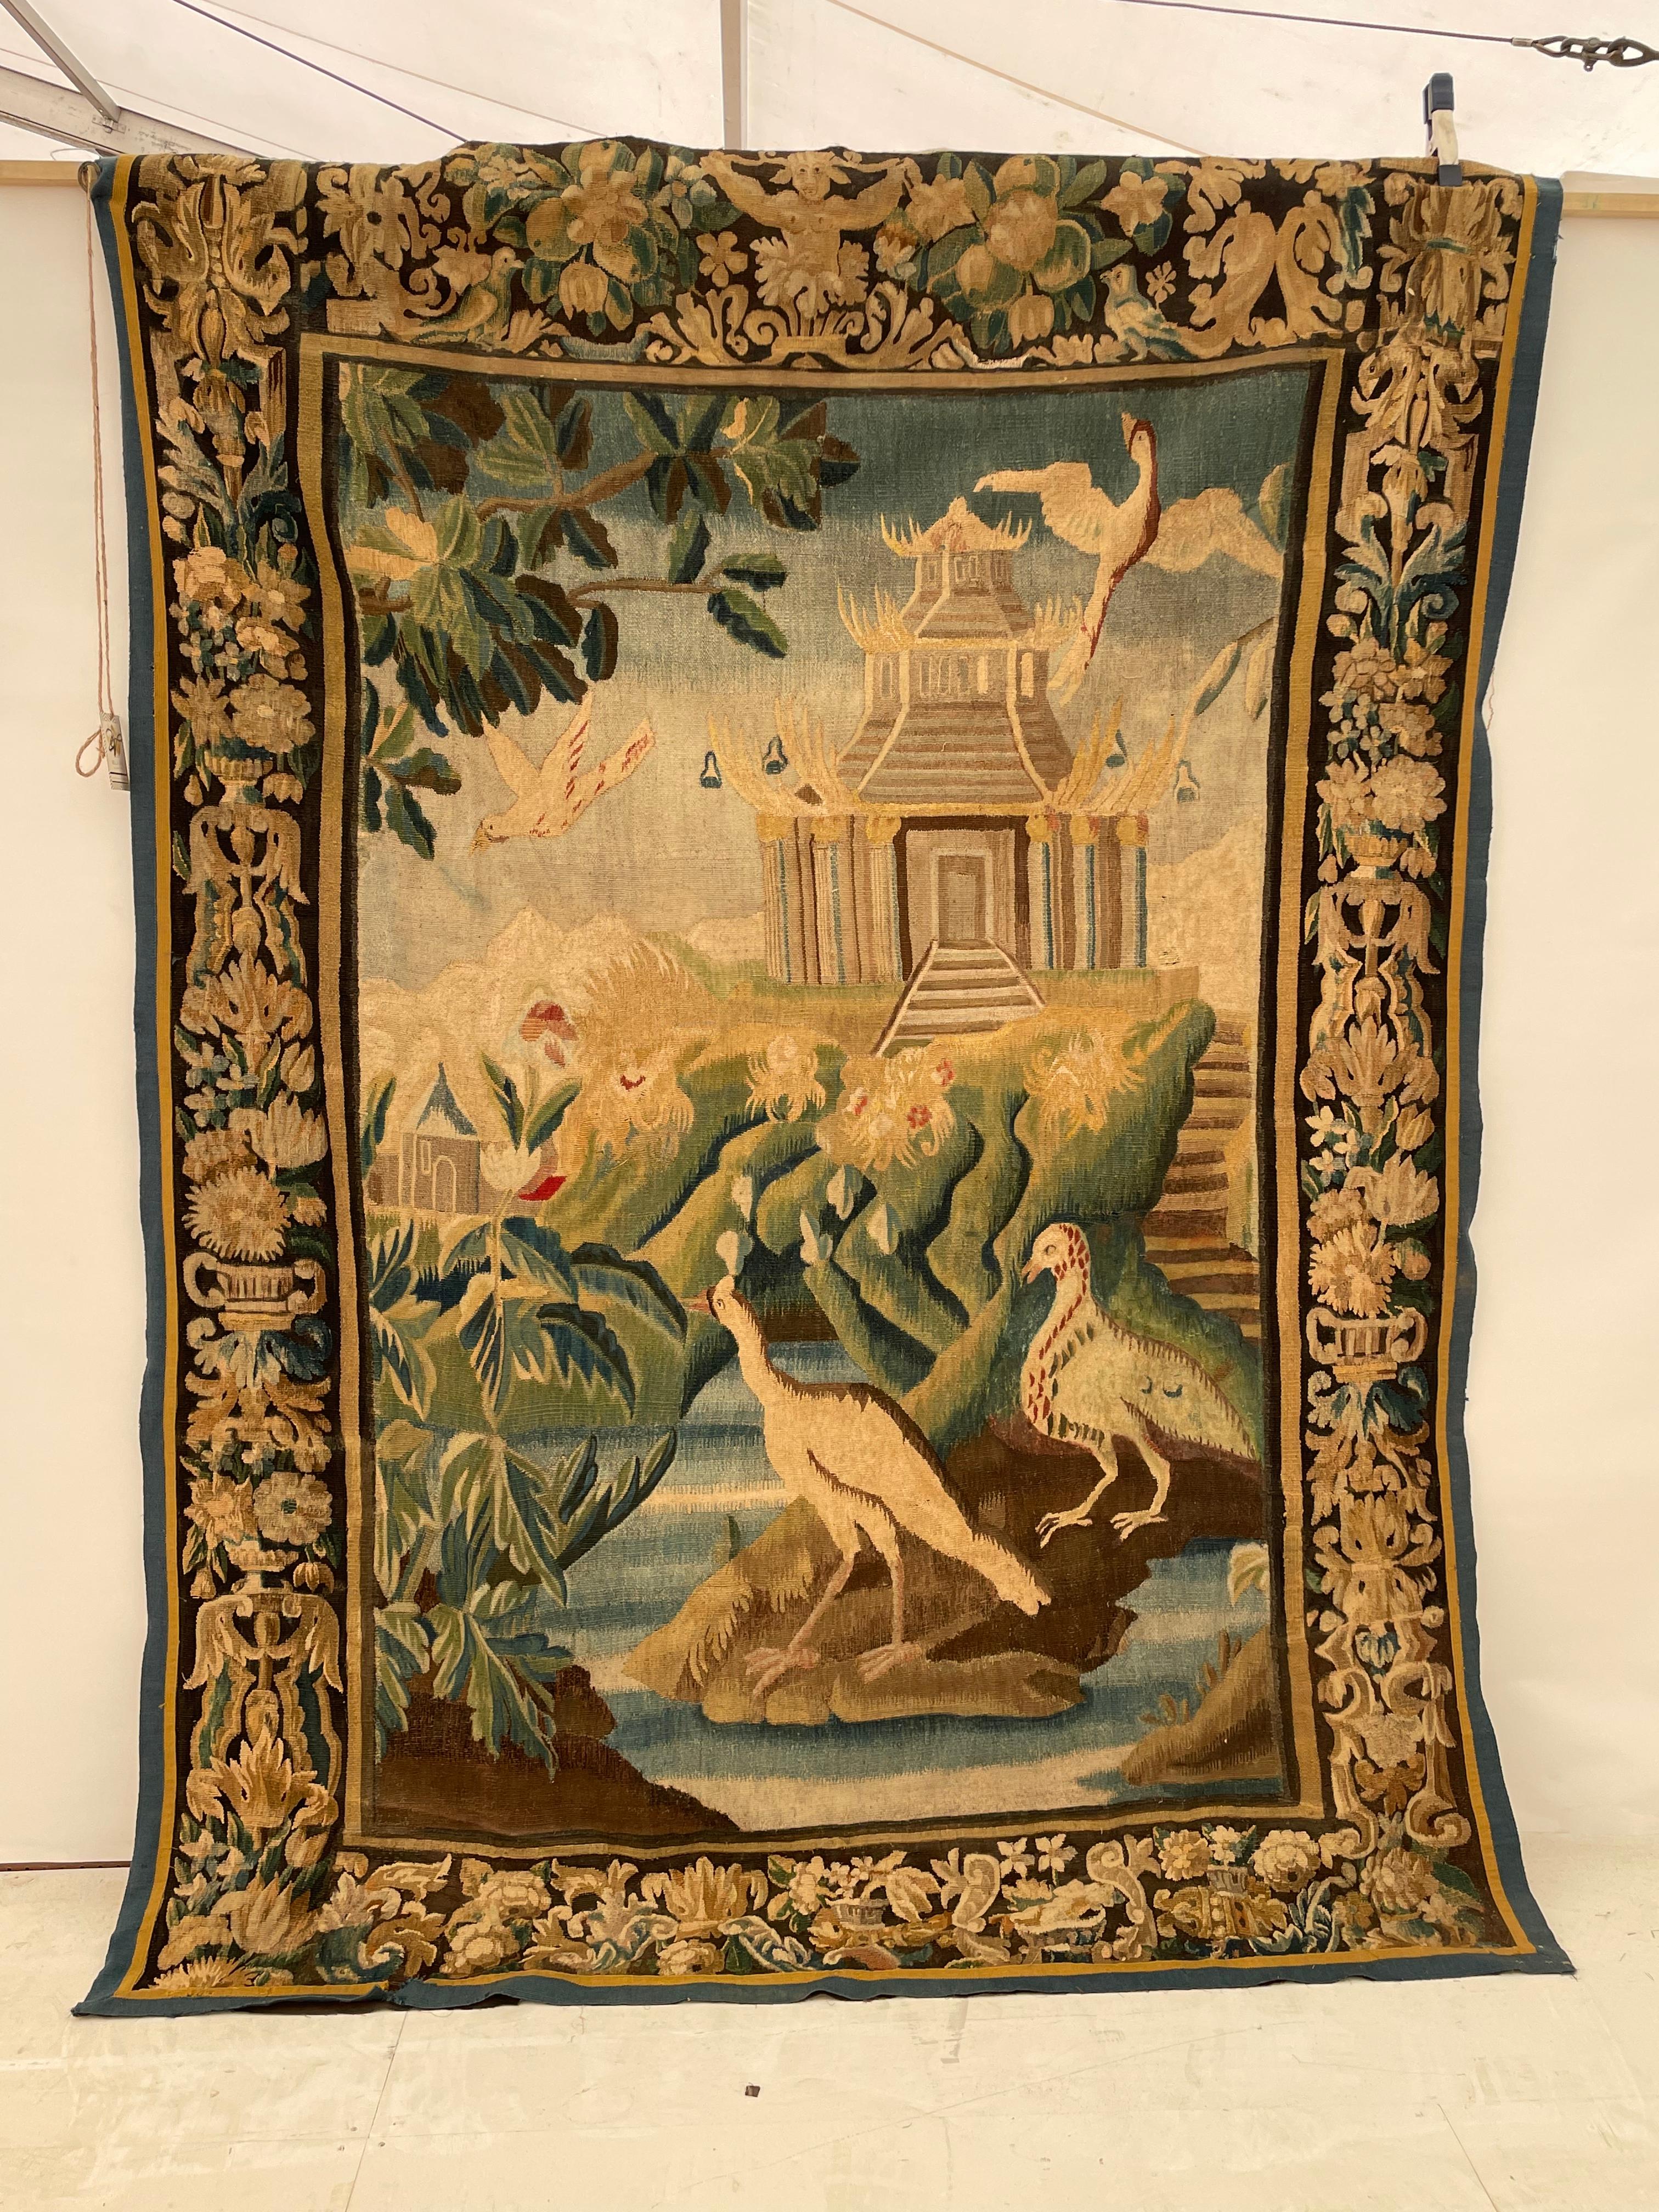 Beautiful 19th Century Flemish Tapestry. Purchased in Italy and is ready for its new home. Carries gold, green, brown, red, teal blue and more colors. Perfect for any home and space. This piece can be tacked on to the wall or repaired to hold rings